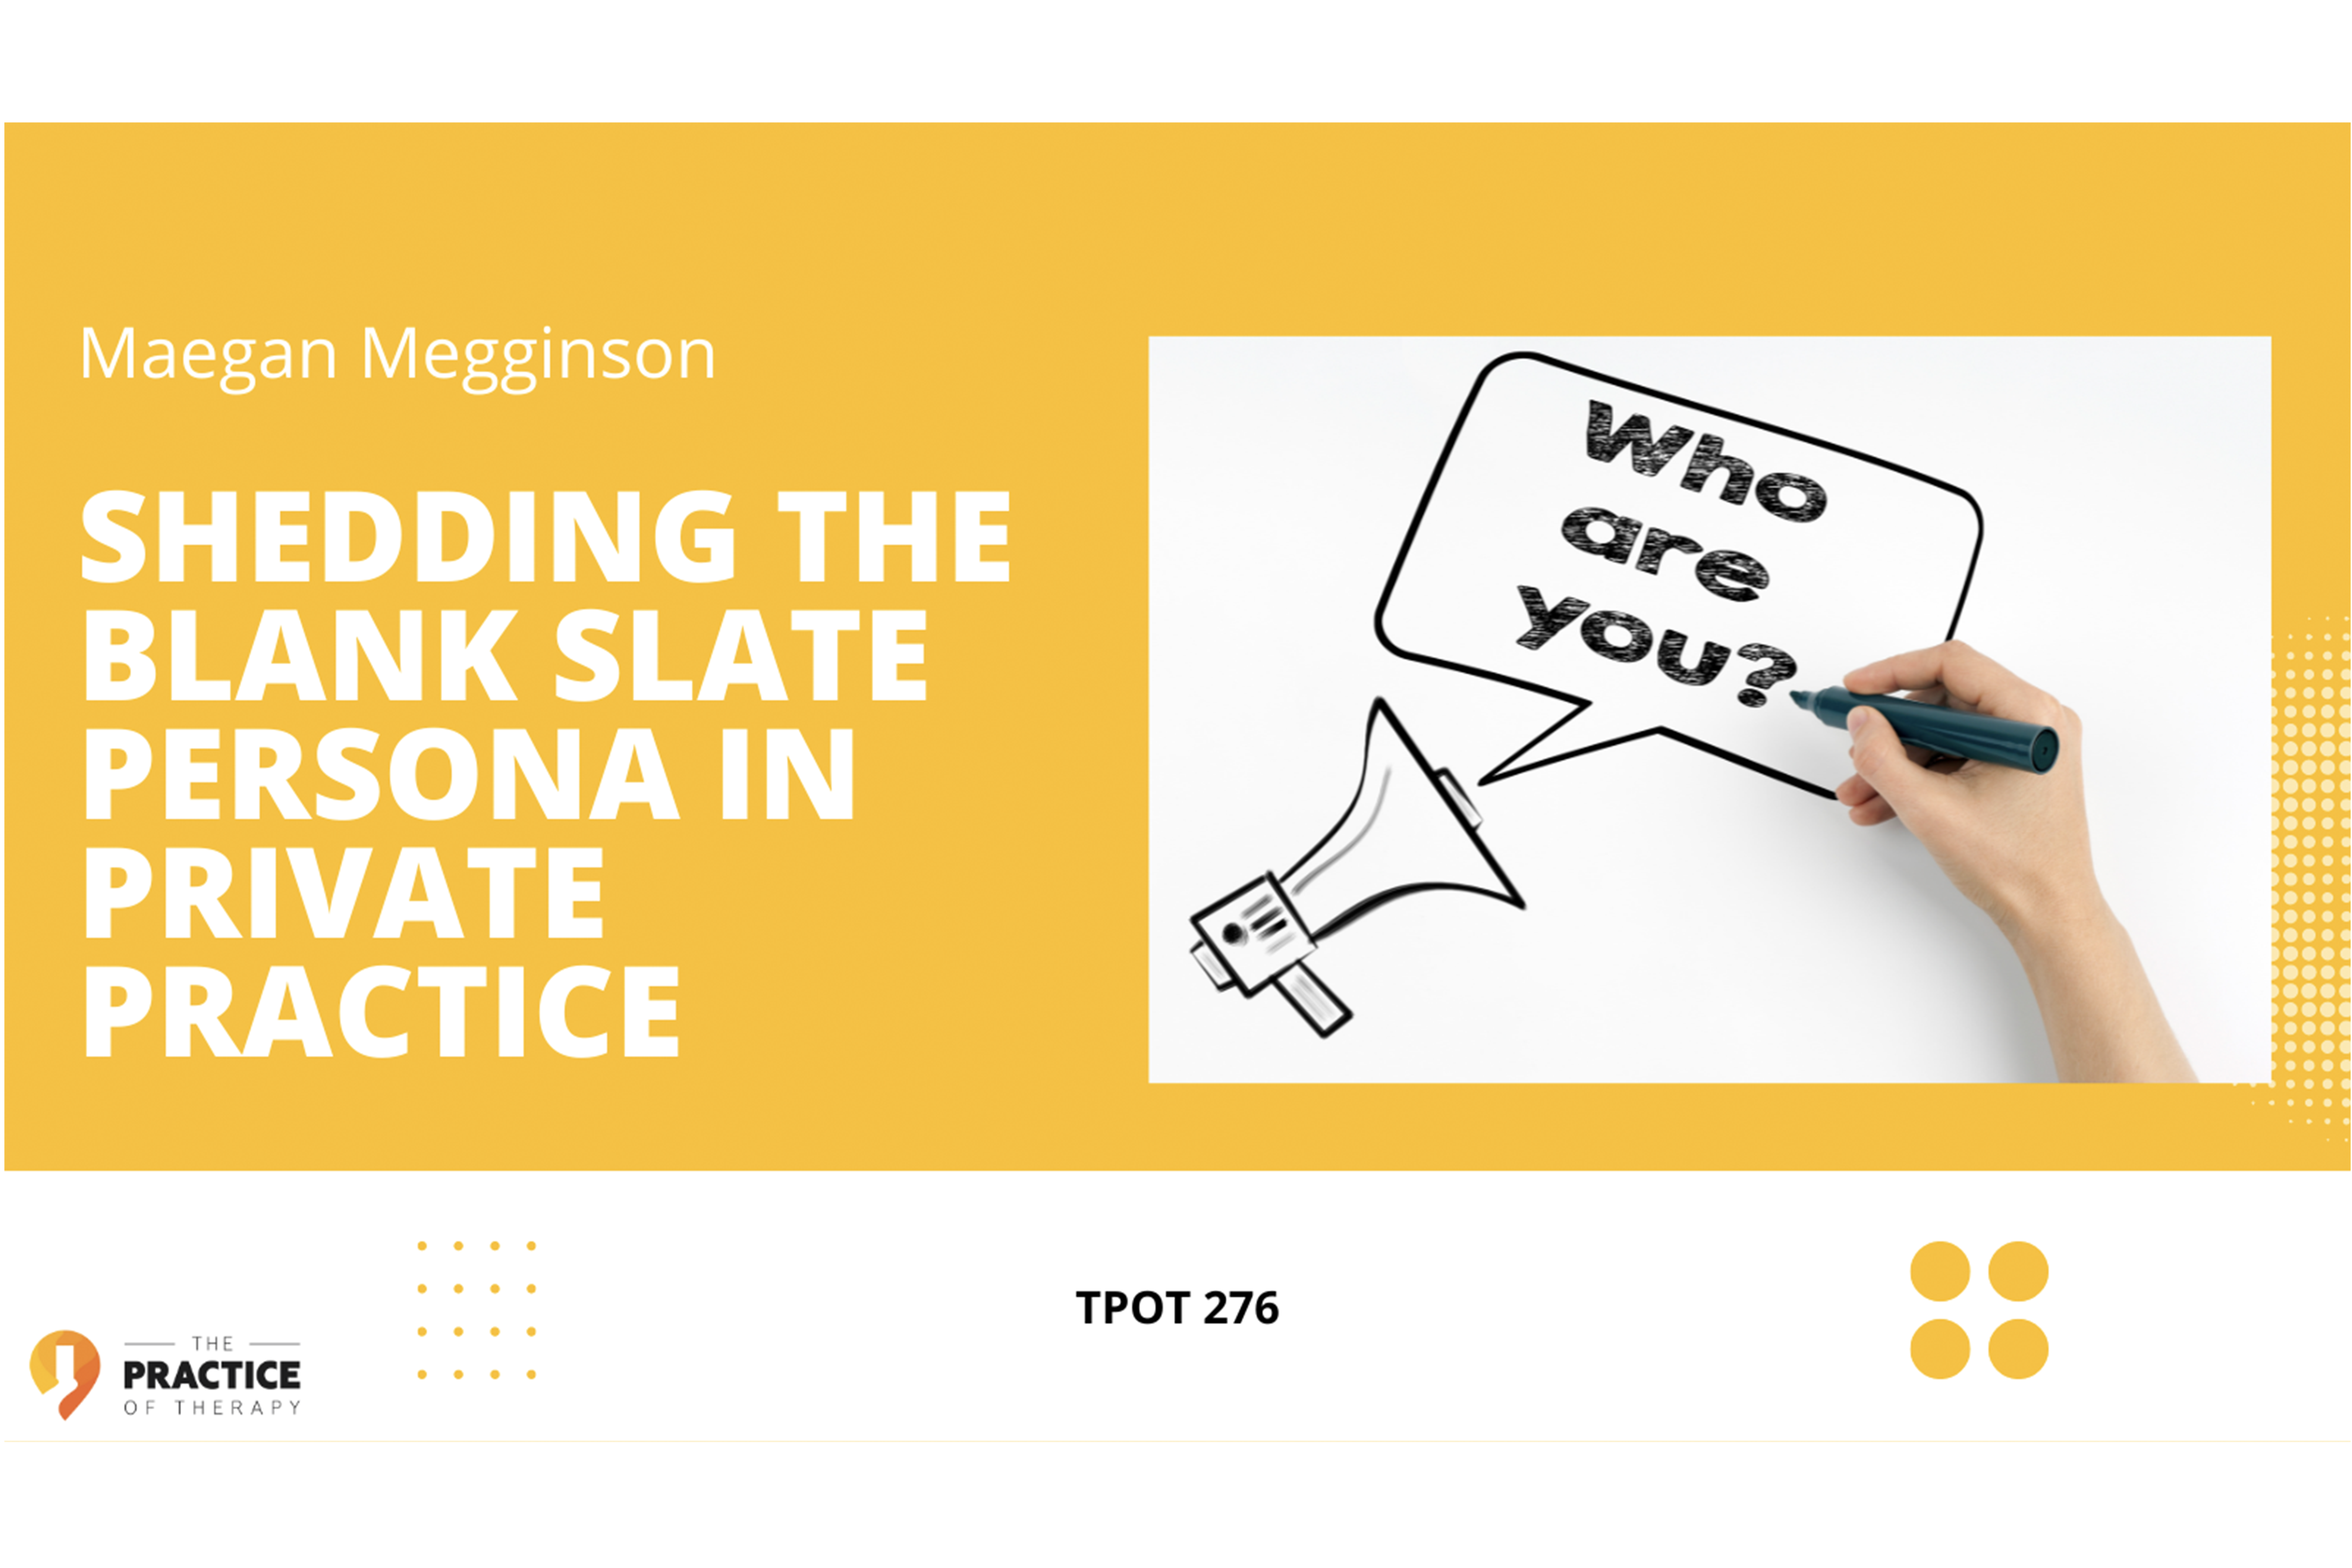 Image is a graphic for The Practice of Therapy Podcast, showing a yellow background with a picture of a megaphone shouting "Who are you?" and the words "Shedding the blank slate persona in private practice."